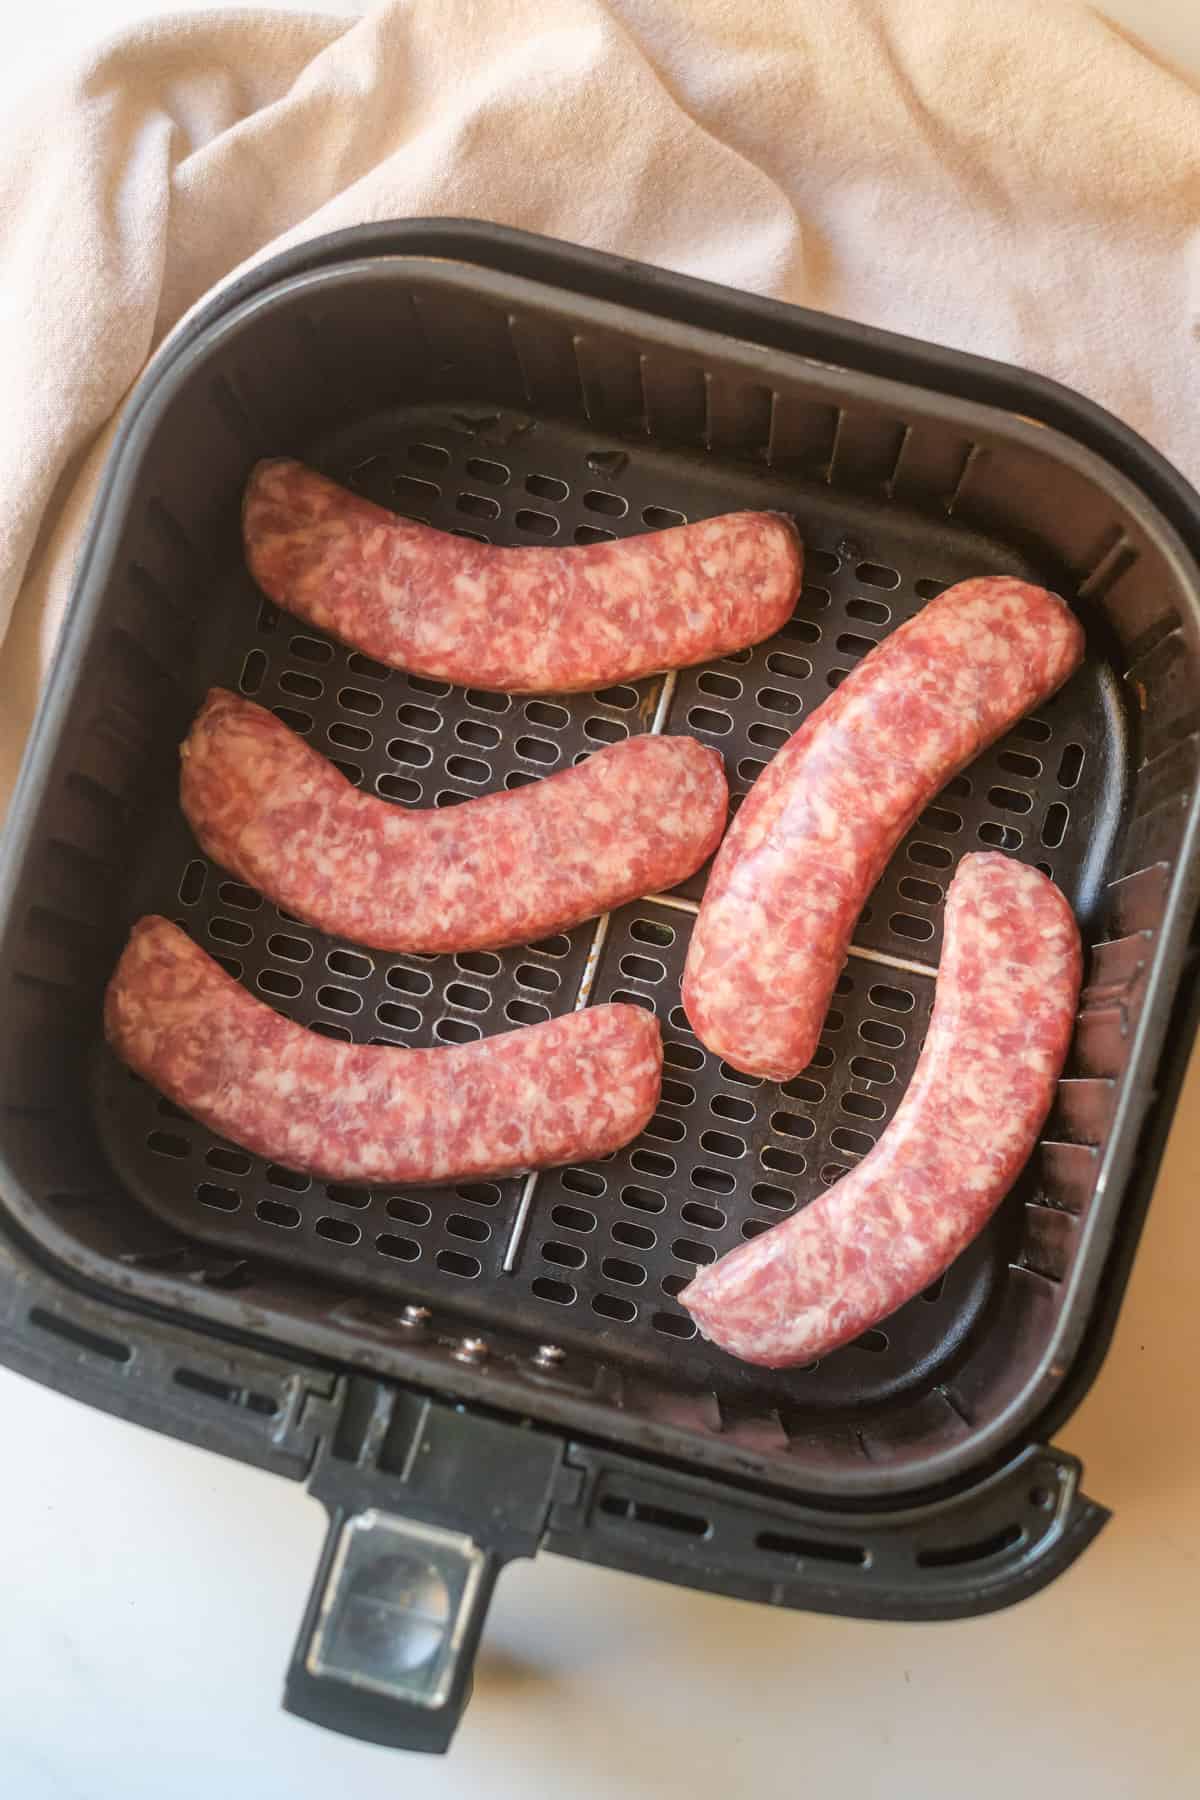 Brats in air fryer ready to be cooked.